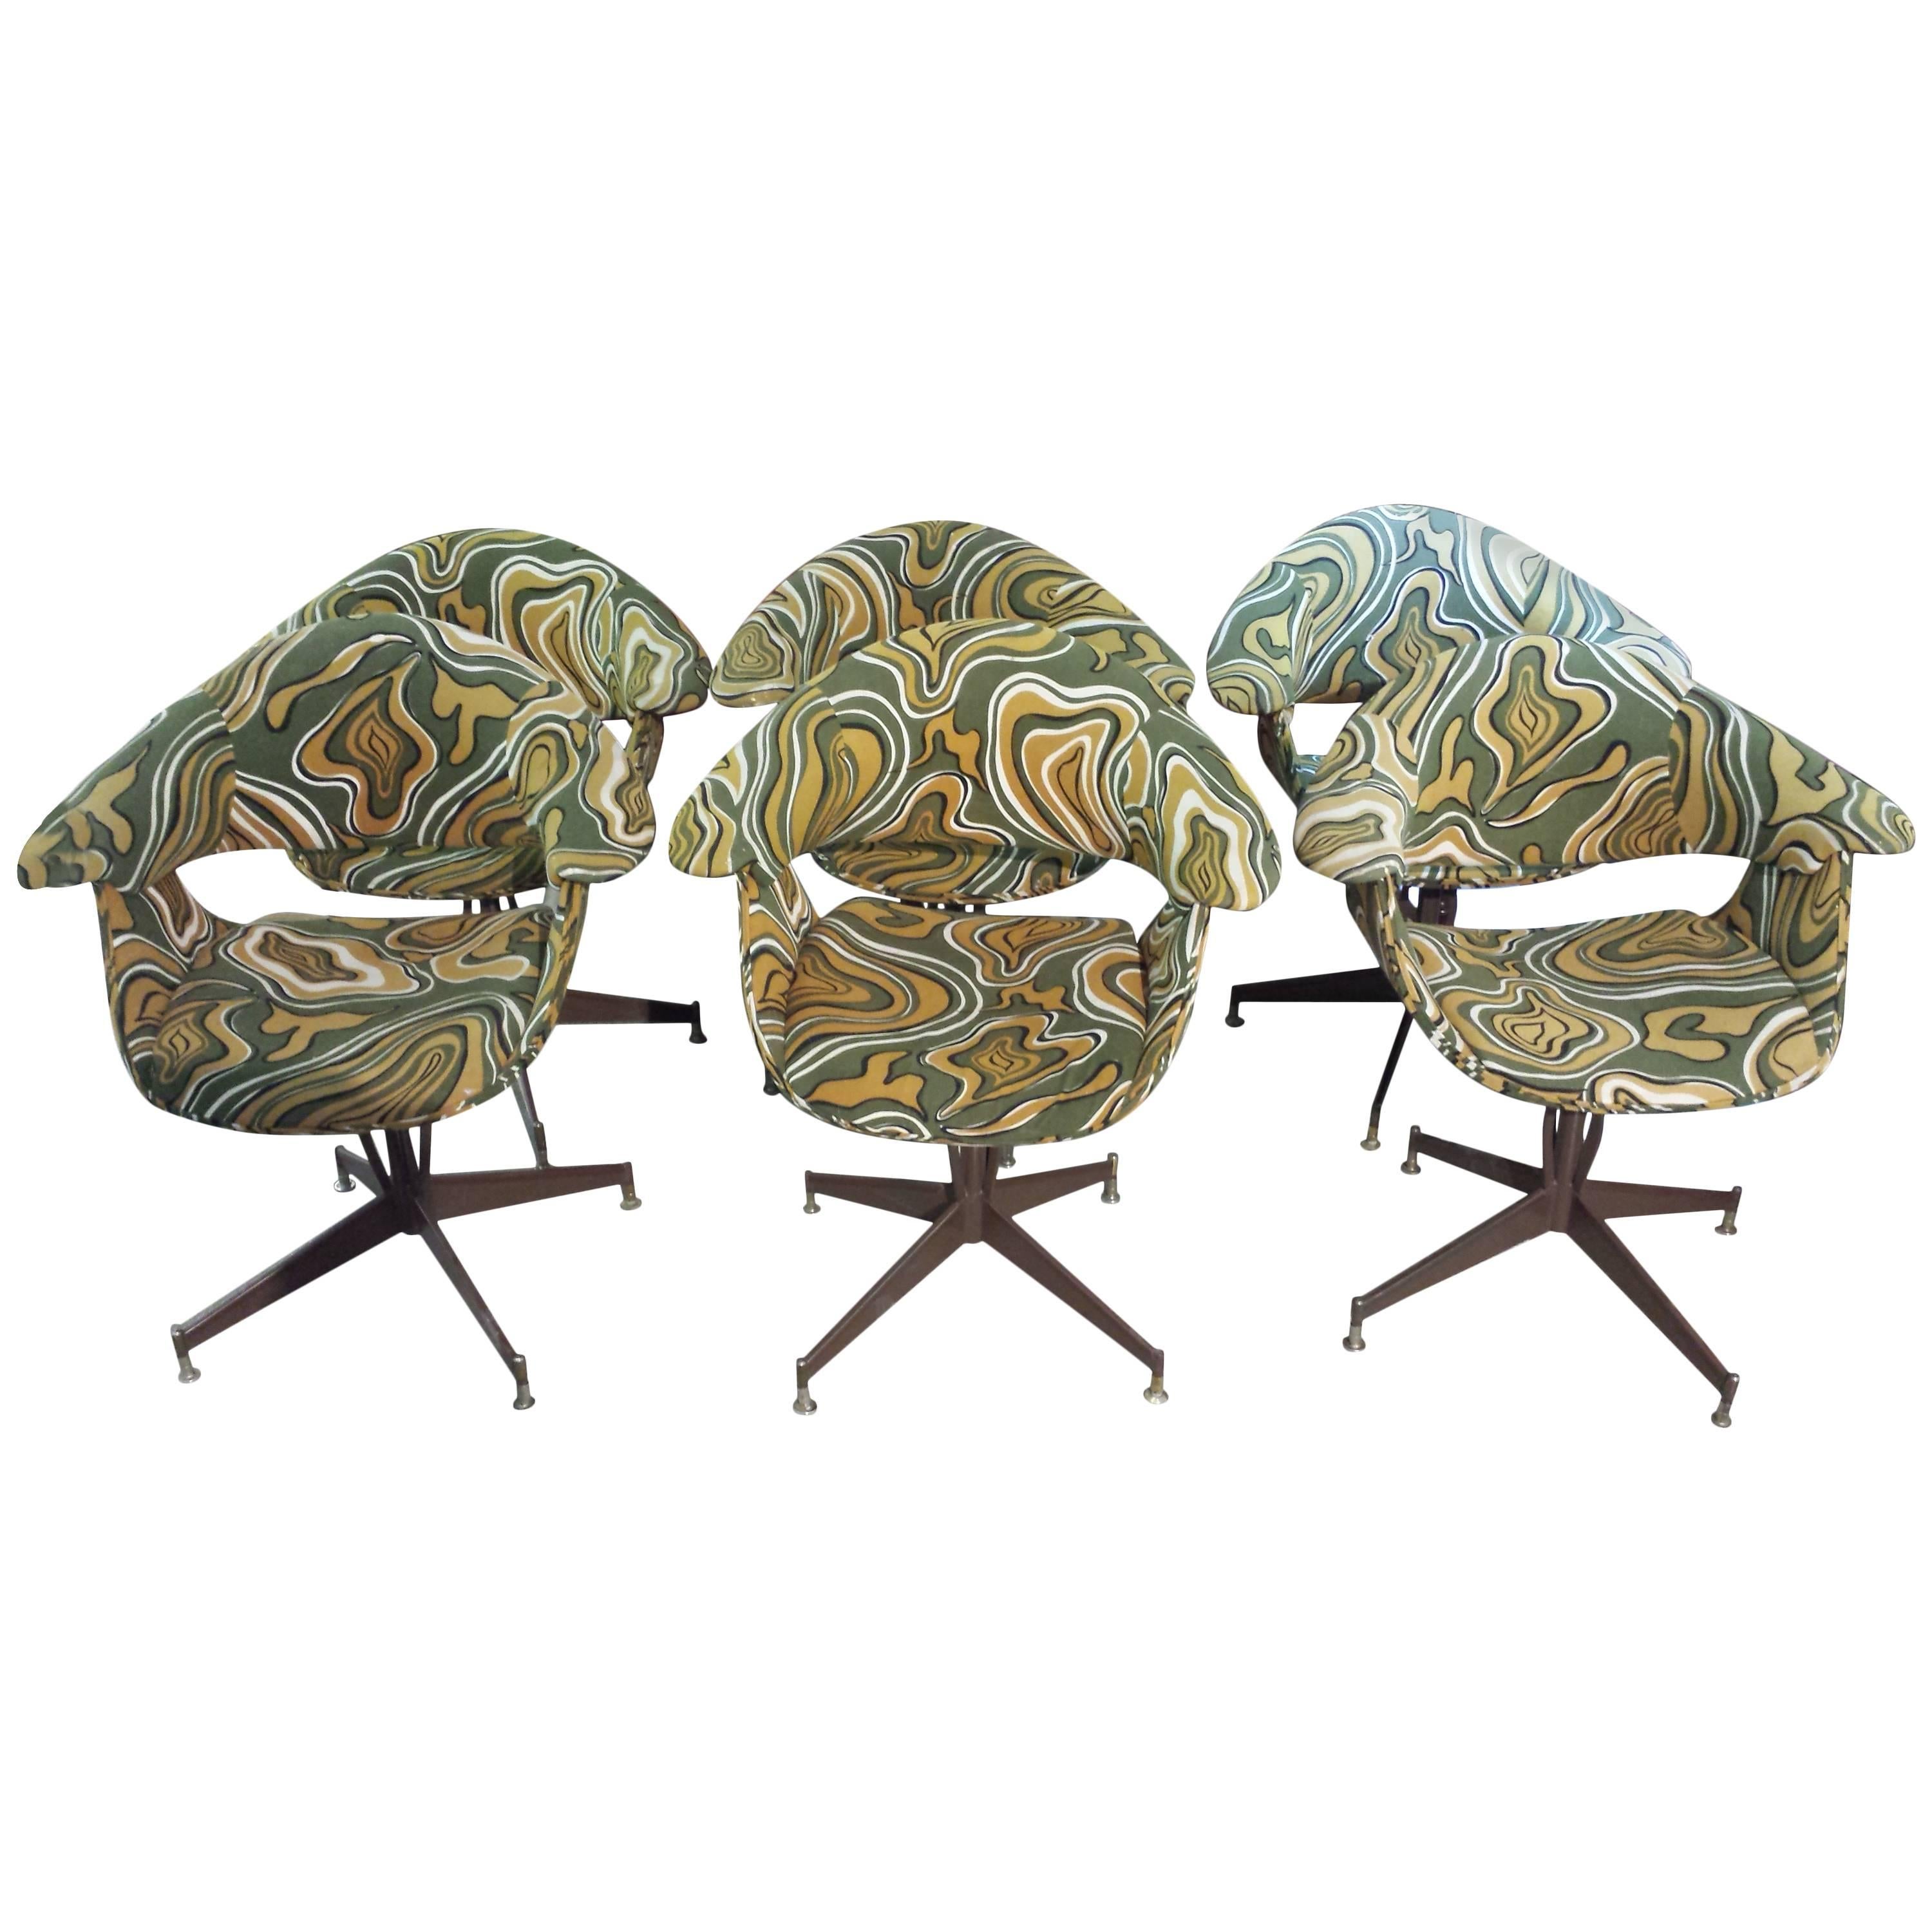 Set of Six George Nelson Style Shell/Swag Chairs from 1969 with Original Fabric